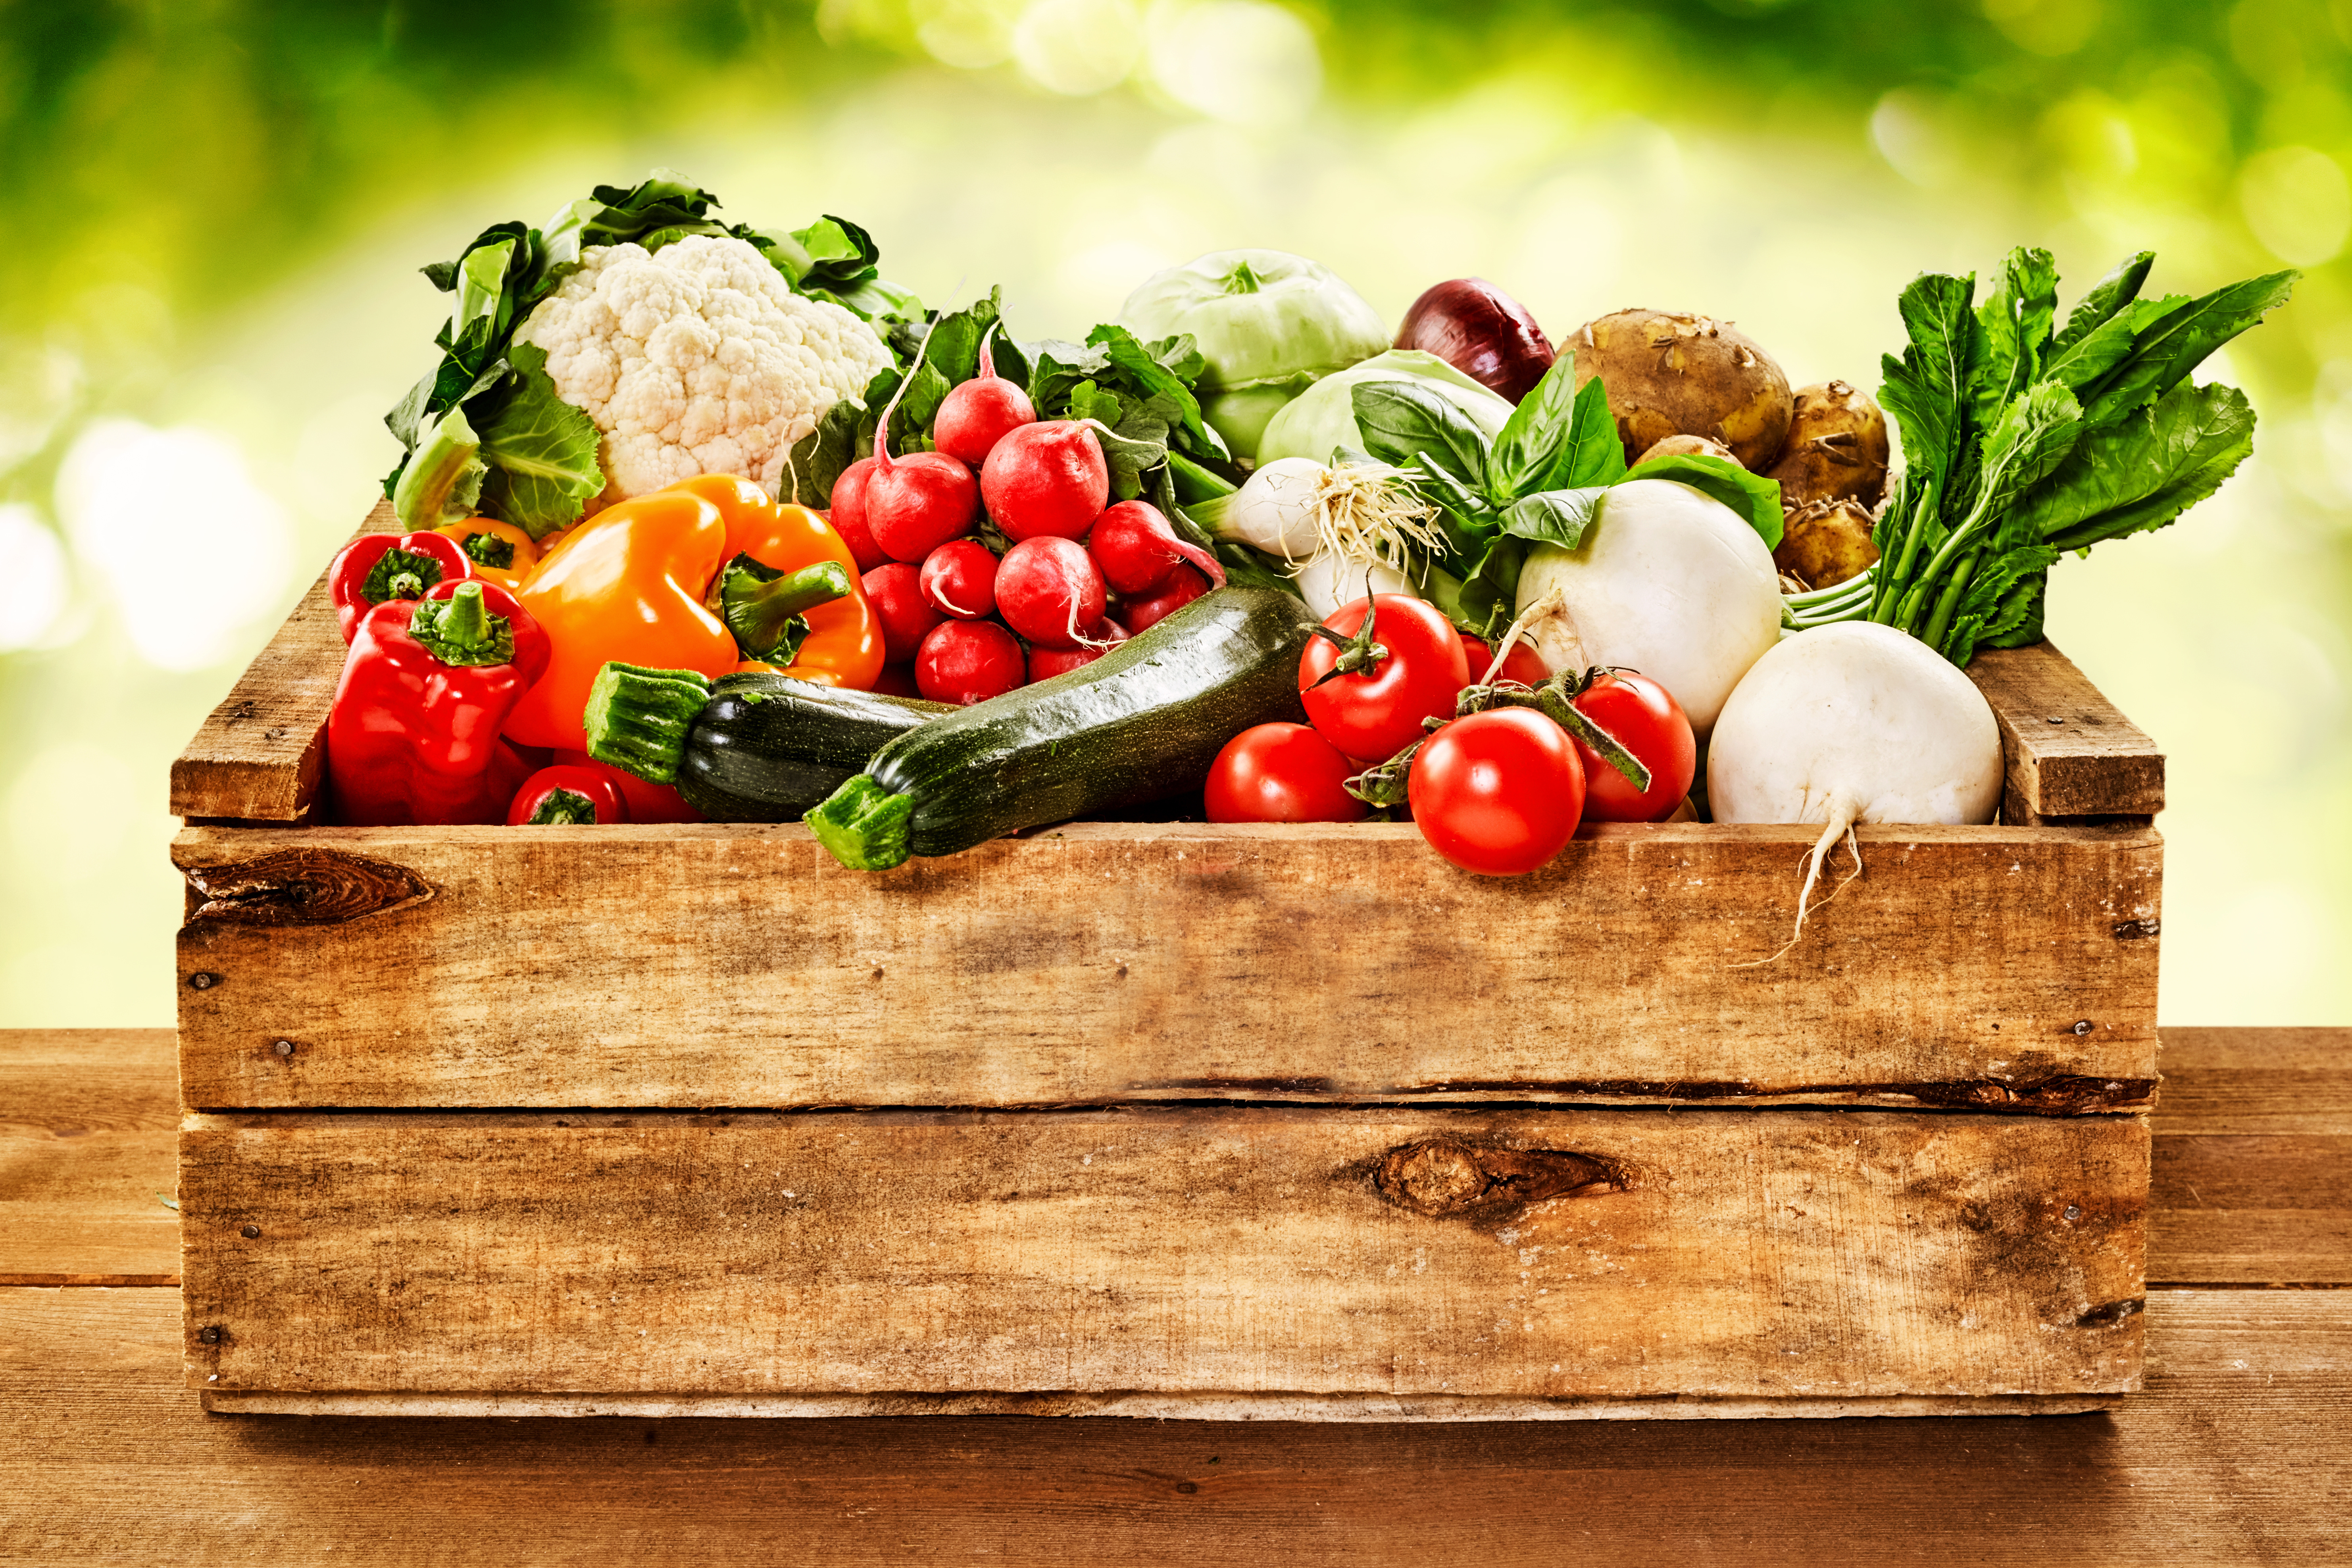 Wooden crate of farm fresh vegetables with cauliflower, tomatoes, zucchini, turnips and colorful sweet bell peppers on a wooden table outdoors in sparkling sunlight on greenery